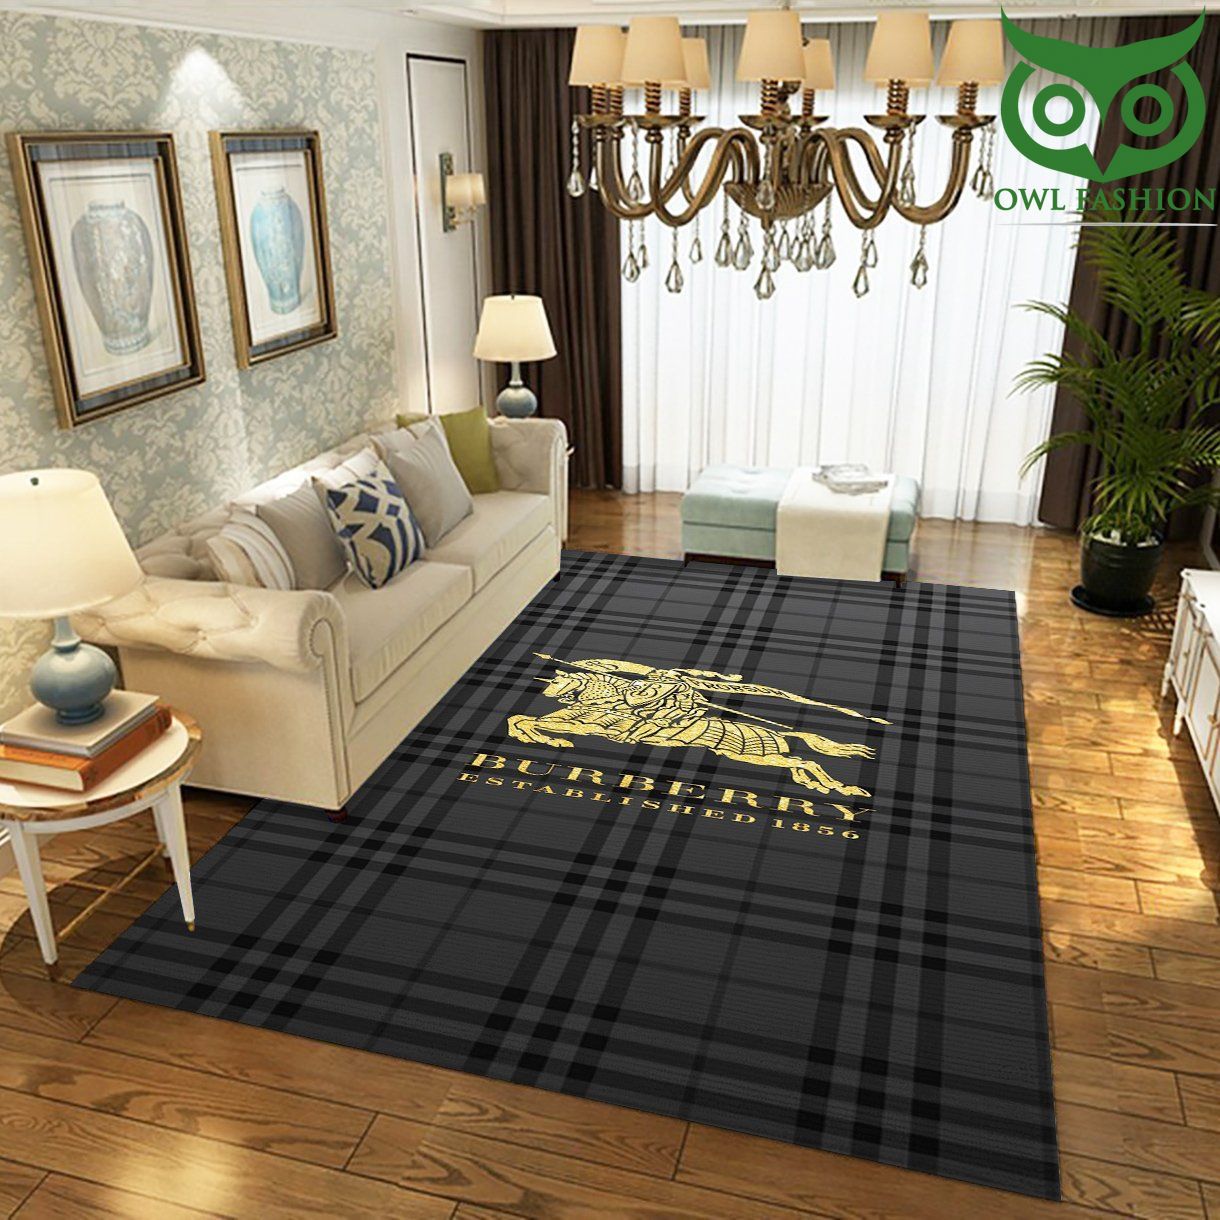 Burberry home and floor decor carpet rug LIMITED EDITION